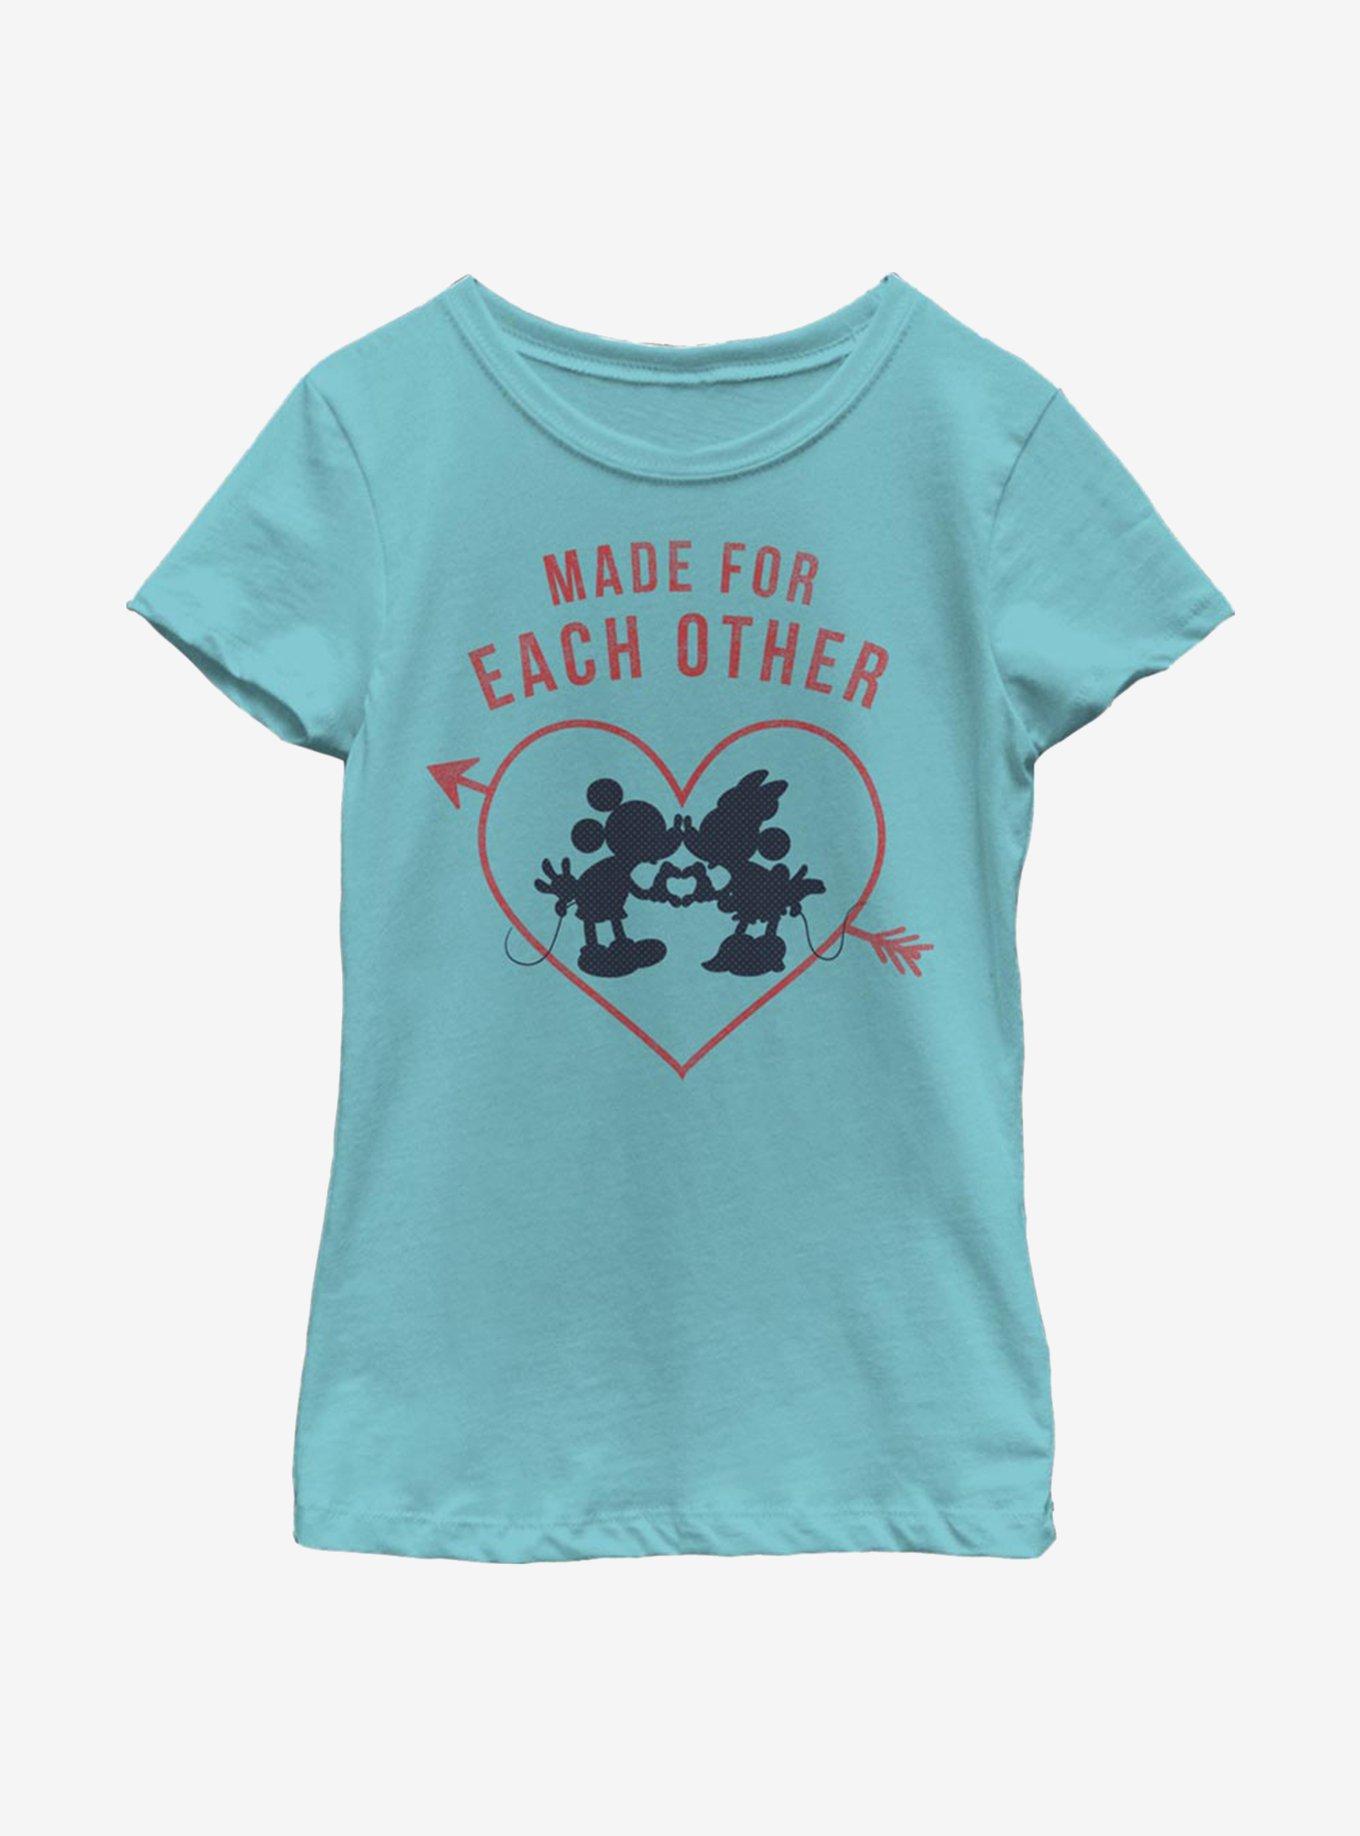 Disney Mickey Mouse Heart Polka Dot Silhouette Youth Girls T-Shirt, , hi-res